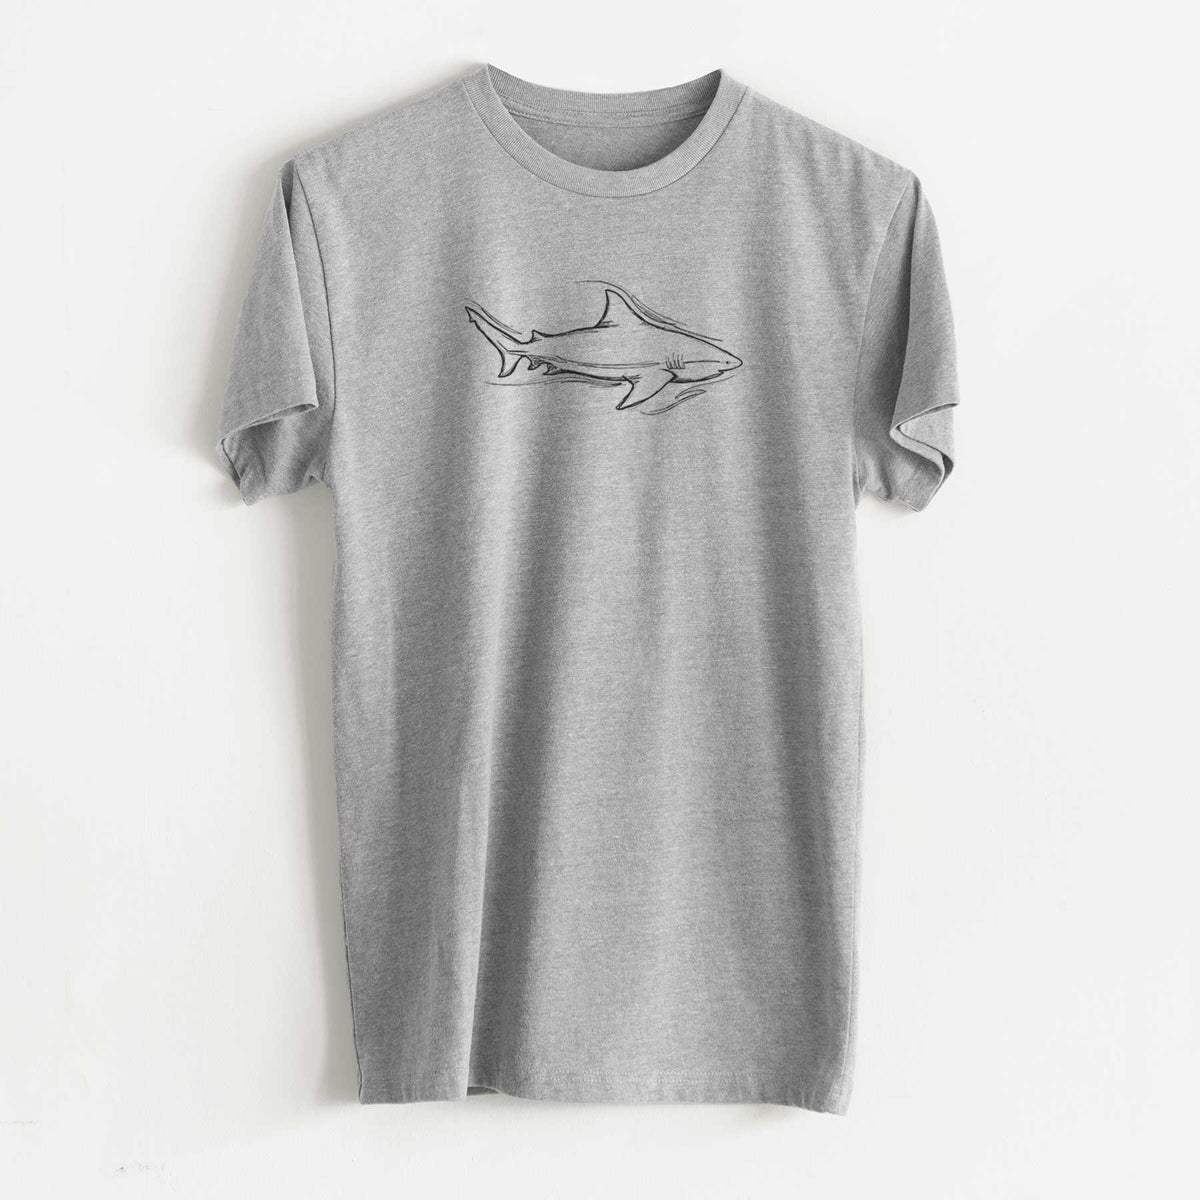 Bull Shark - Unisex Recycled Eco Tee  - CLOSEOUT - FINAL SALE